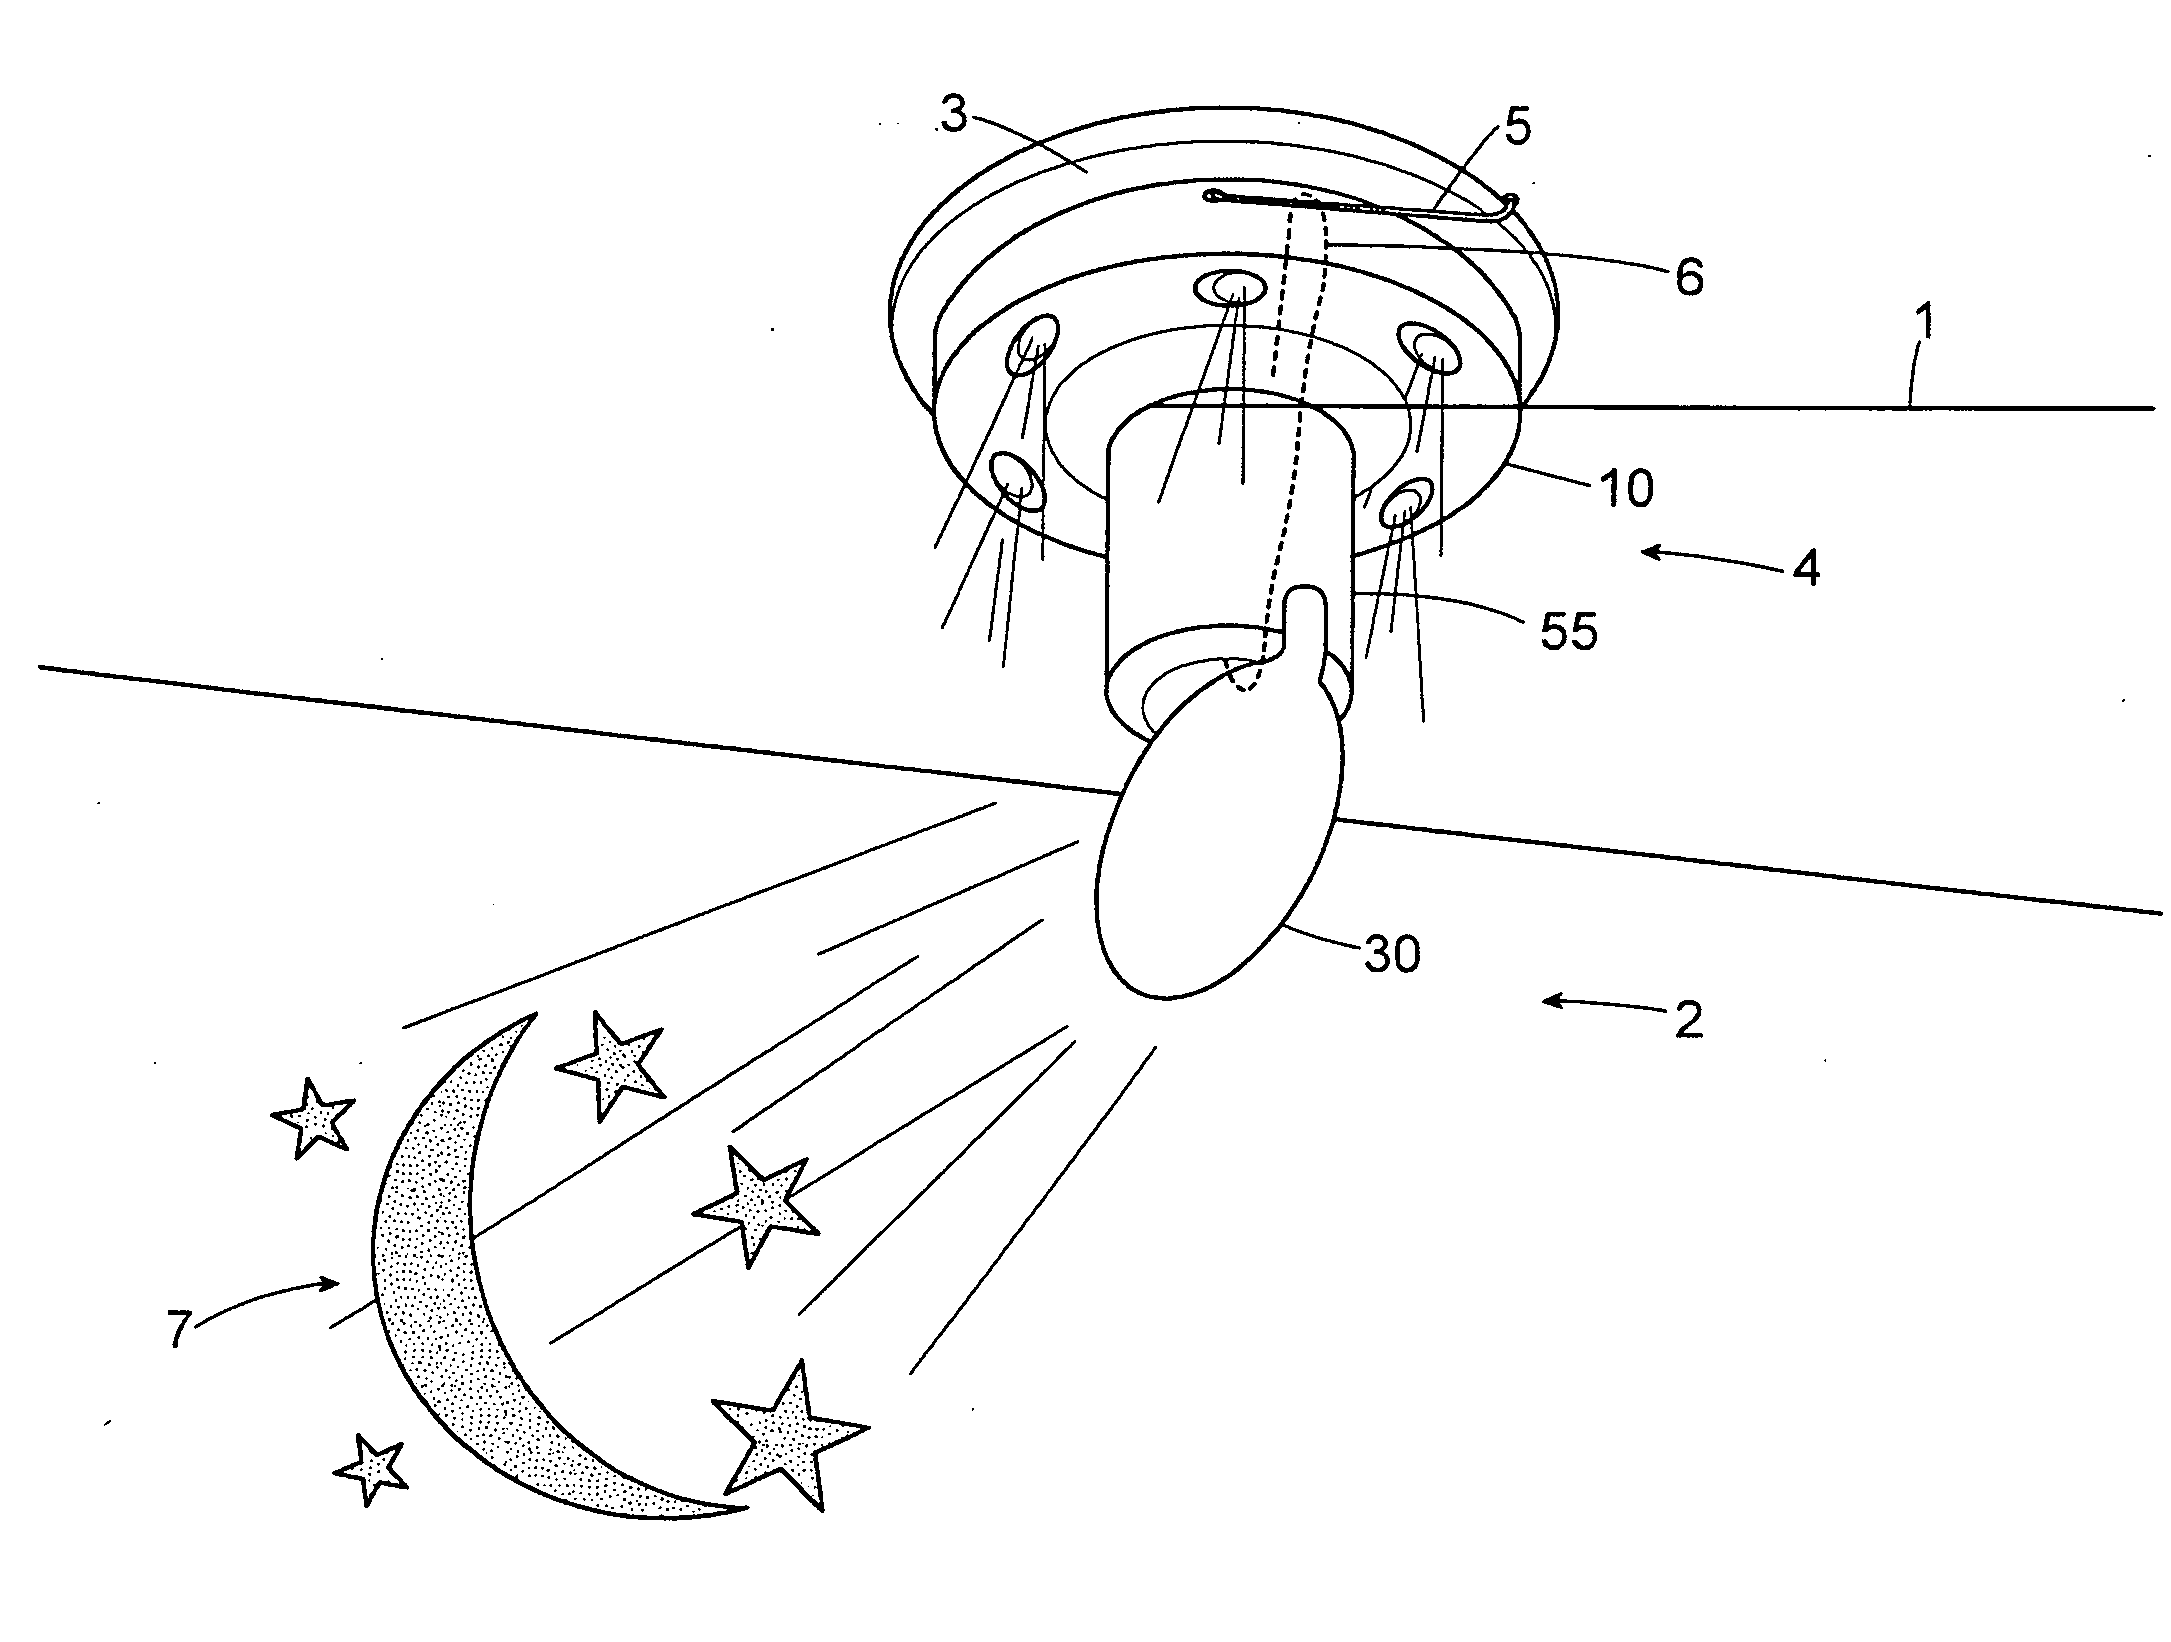 Light projector accessory for recessed lighting fixtures